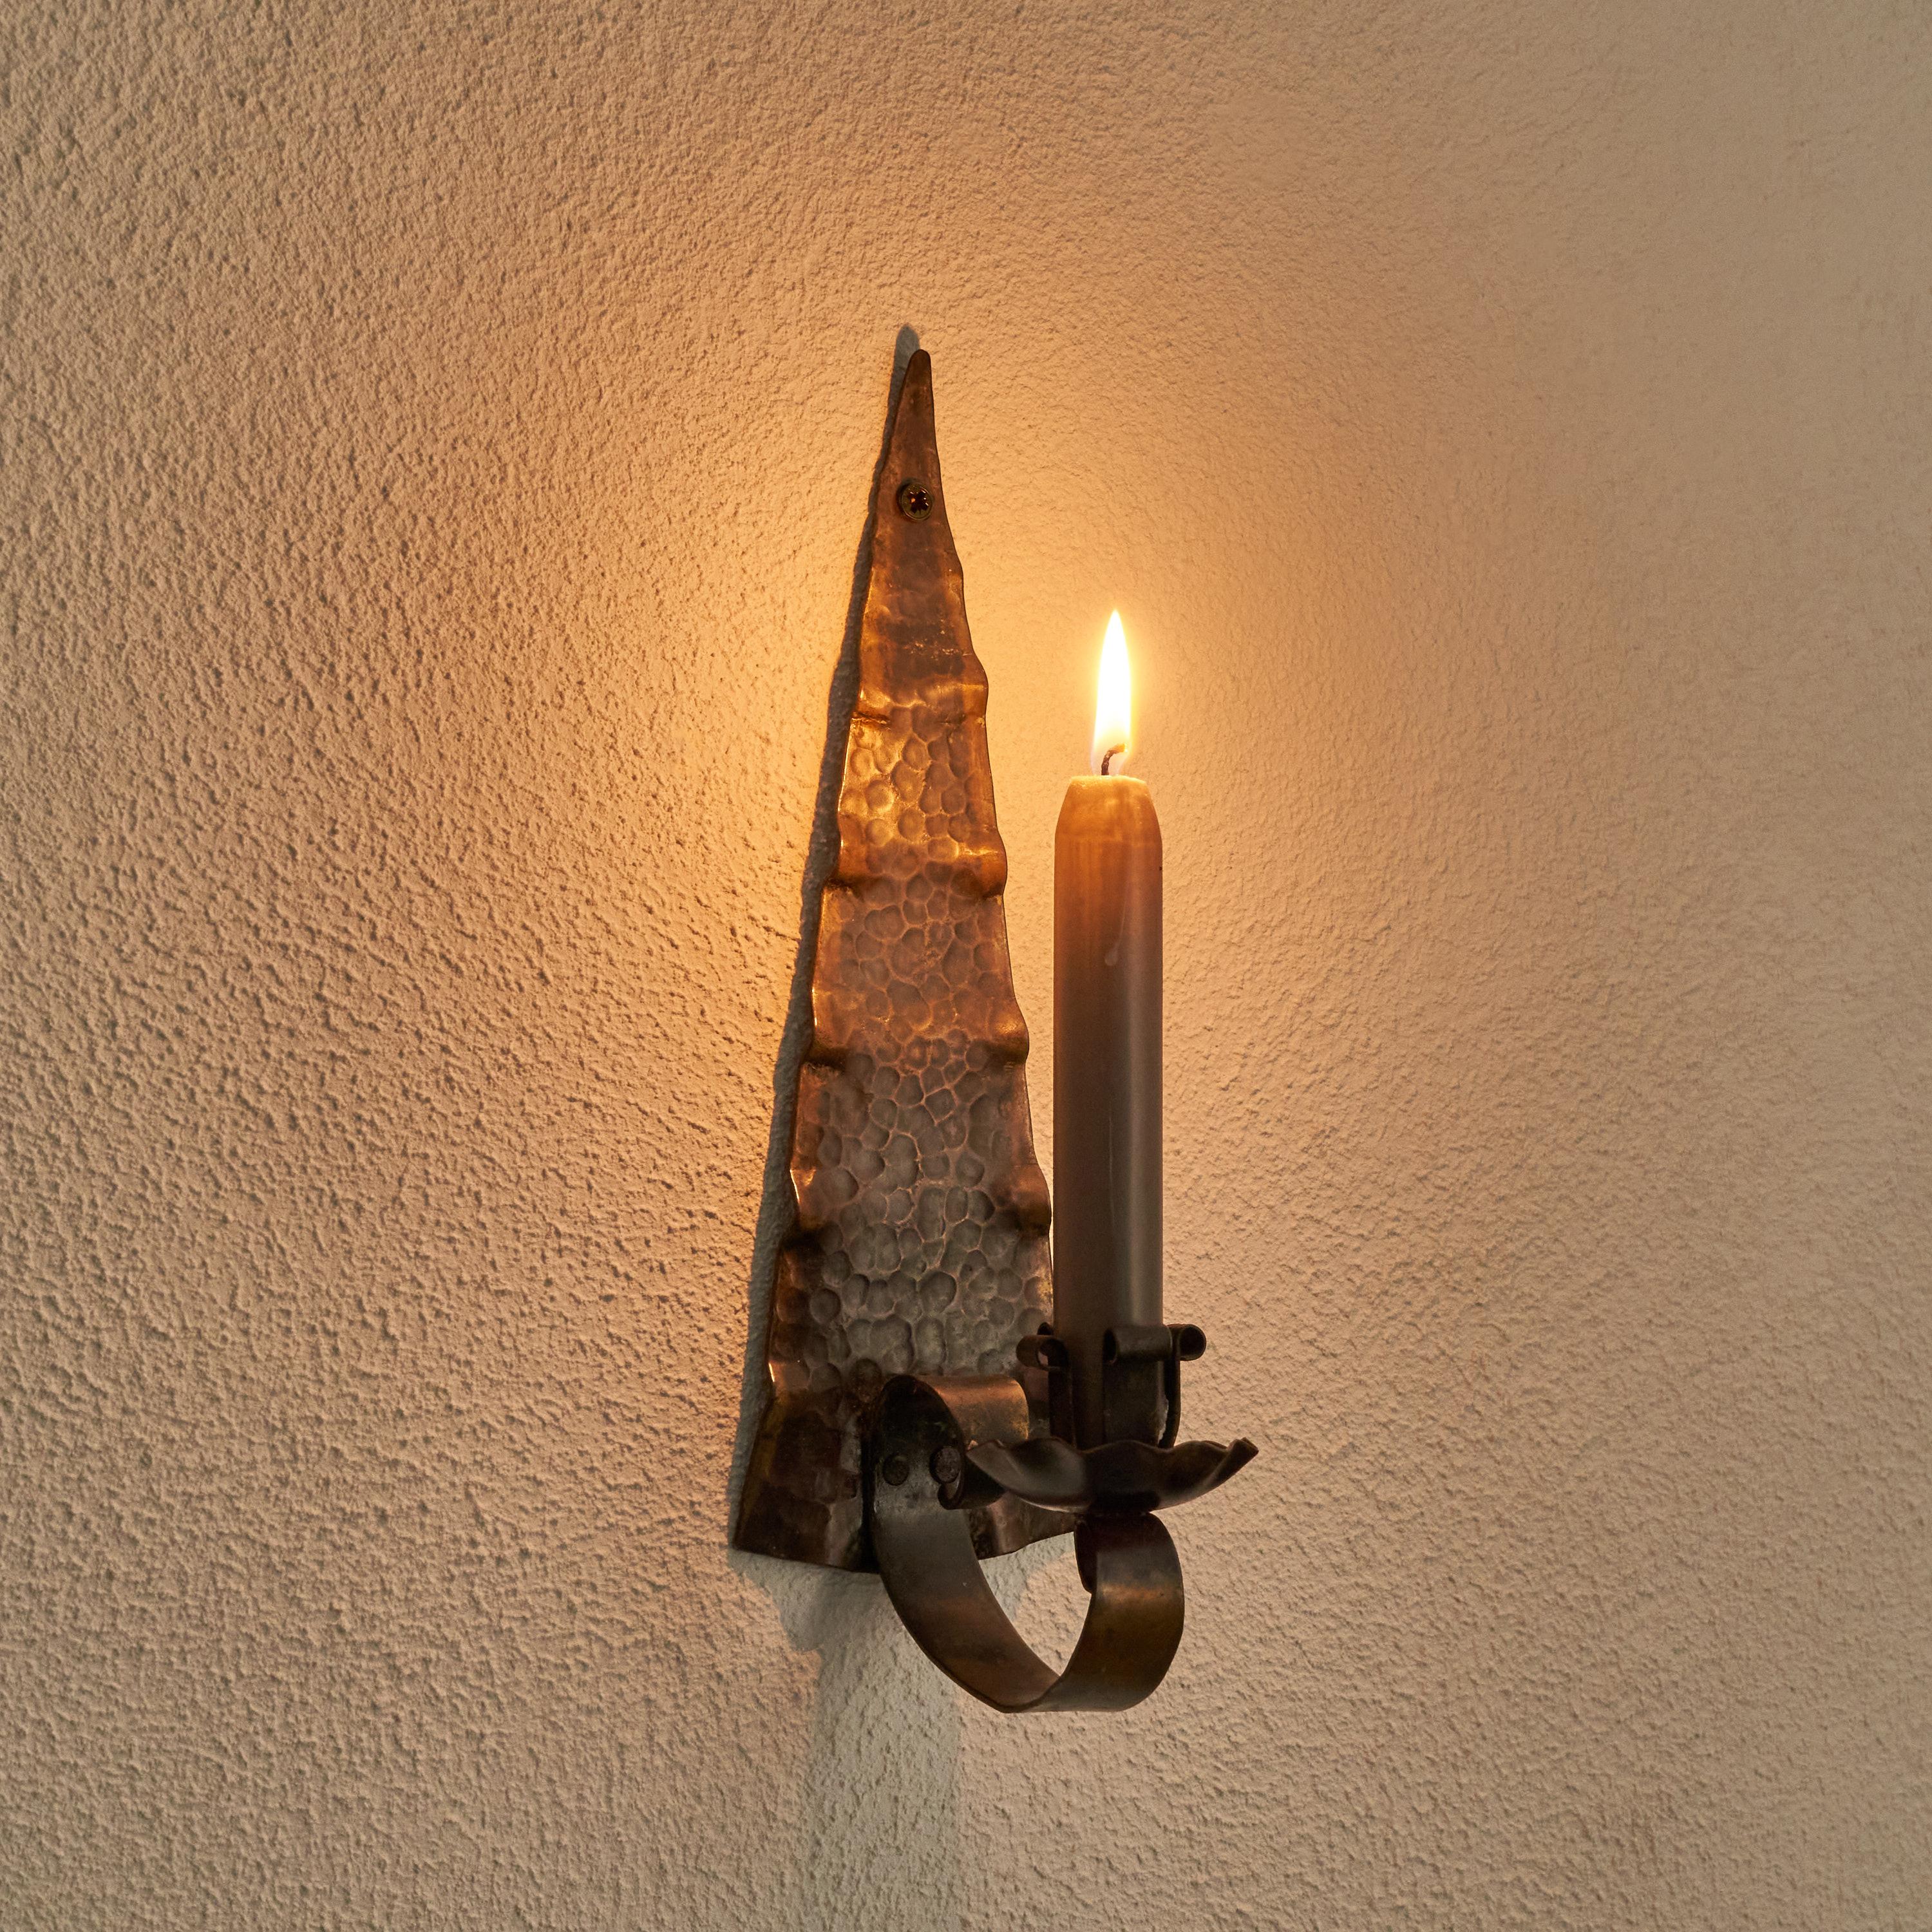 Art Deco candle sconce in hand hammered copper. The Netherlands, 1920s.

This stunning Art Deco Amsterdamse School Wall Candle Holder is a true work of art. Hand crafted in 1930s Holland, this candle holder is made from hand hammered copper with a